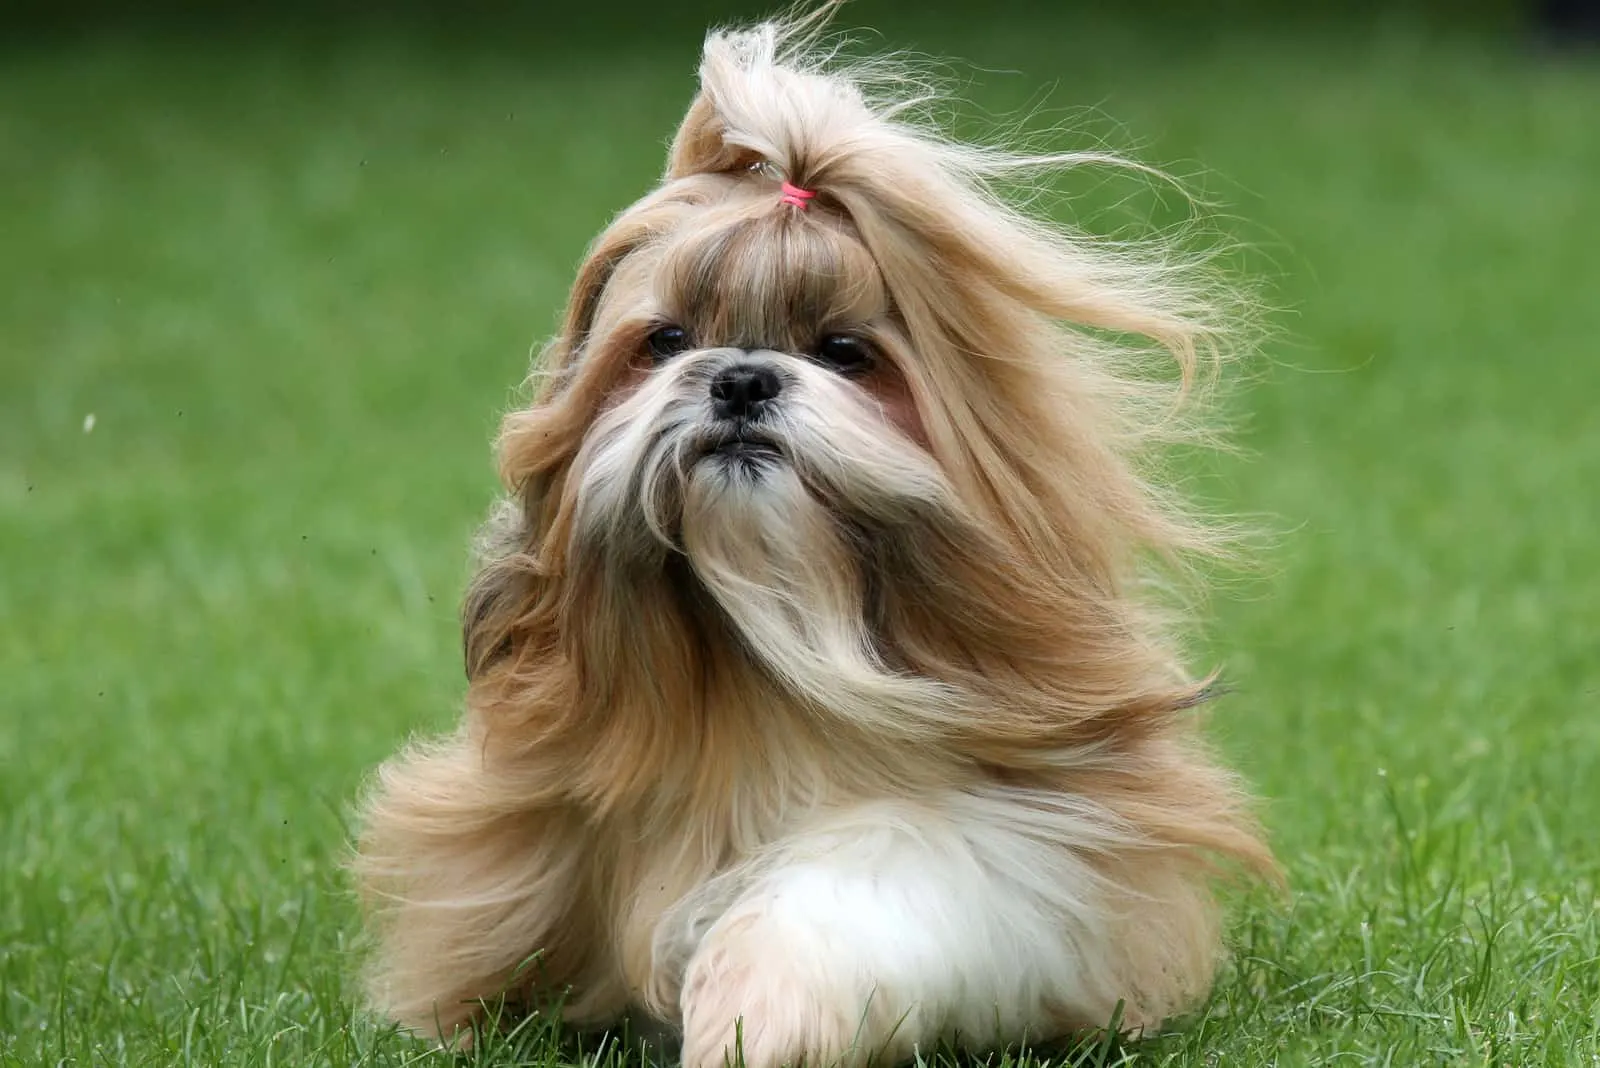 Gold and white Shih Tzu with long flowing hair